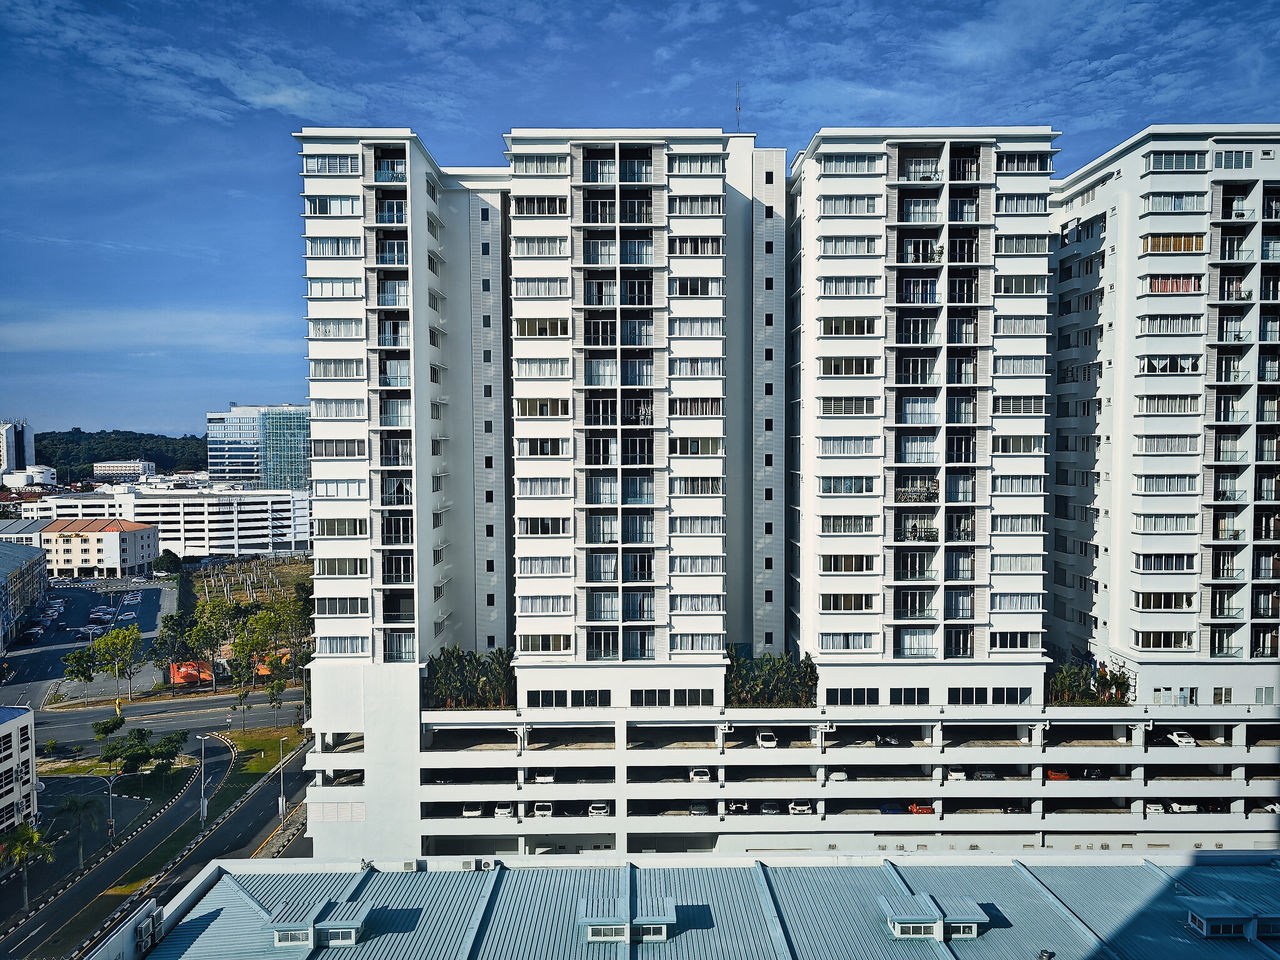 architecture, building exterior, tower block, built structure, city, building, metropolitan area, residential area, condominium, metropolis, skyscraper, residential district, cityscape, sky, urban area, office building exterior, apartment, no people, nature, downtown, neighbourhood, office, day, city life, outdoors, landmark, facade, skyline, street, headquarters, blue, window, construction industry, business finance and industry